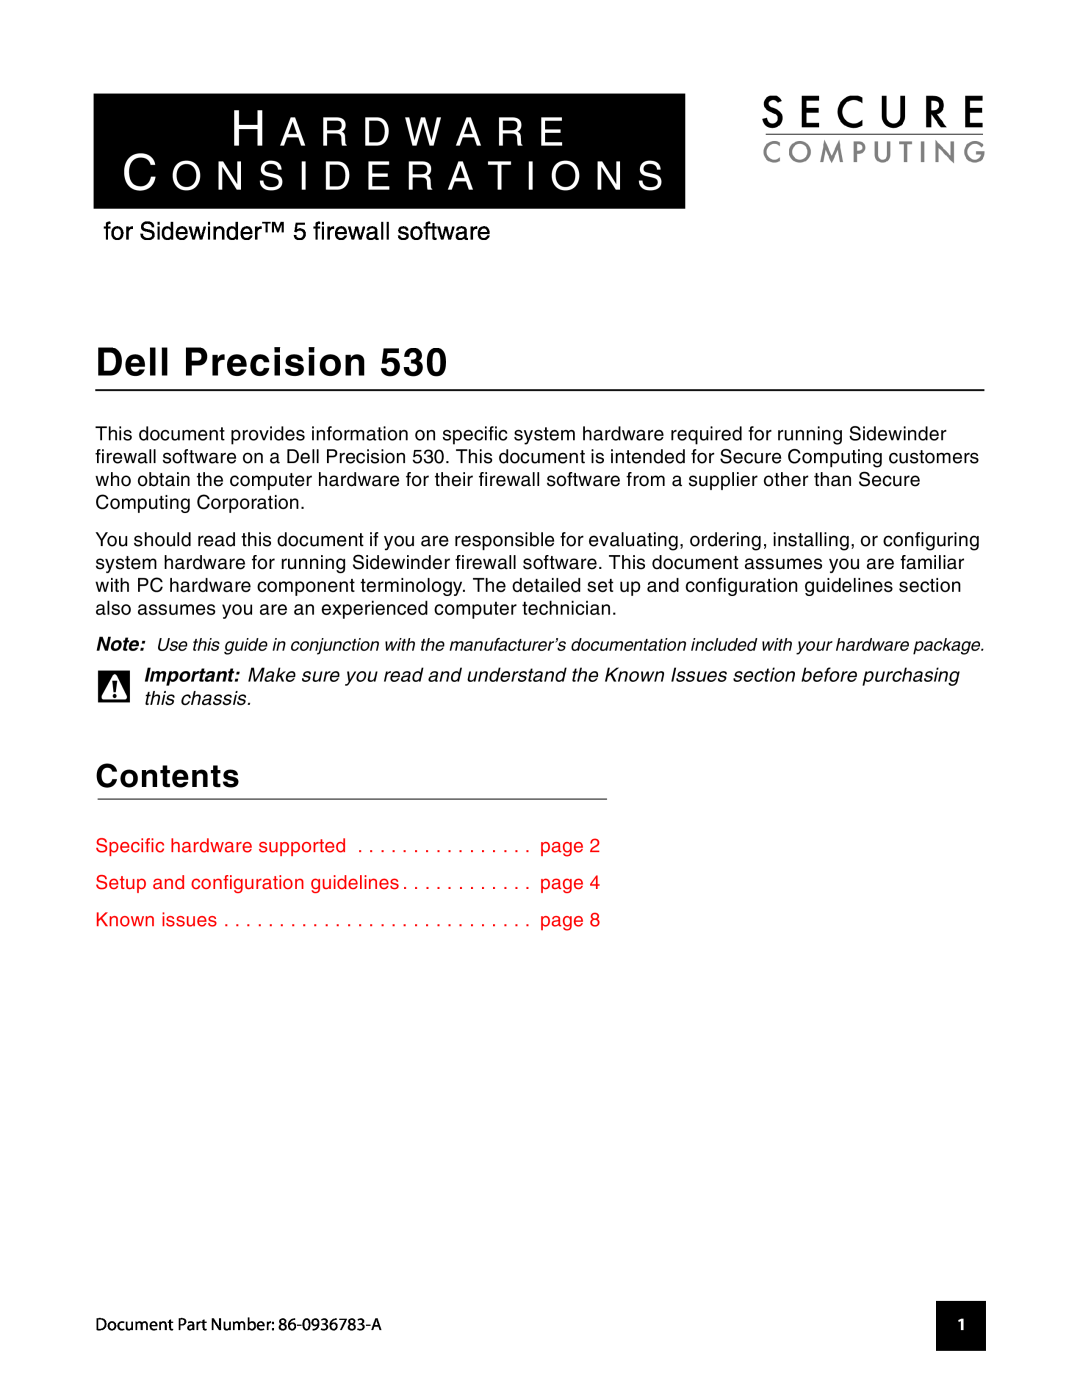 Dell 530 manual H A R D W A R E C O N S I D E R A T I O N S, Dell Precision, Contents, for Sidewinder 5 firewall software 